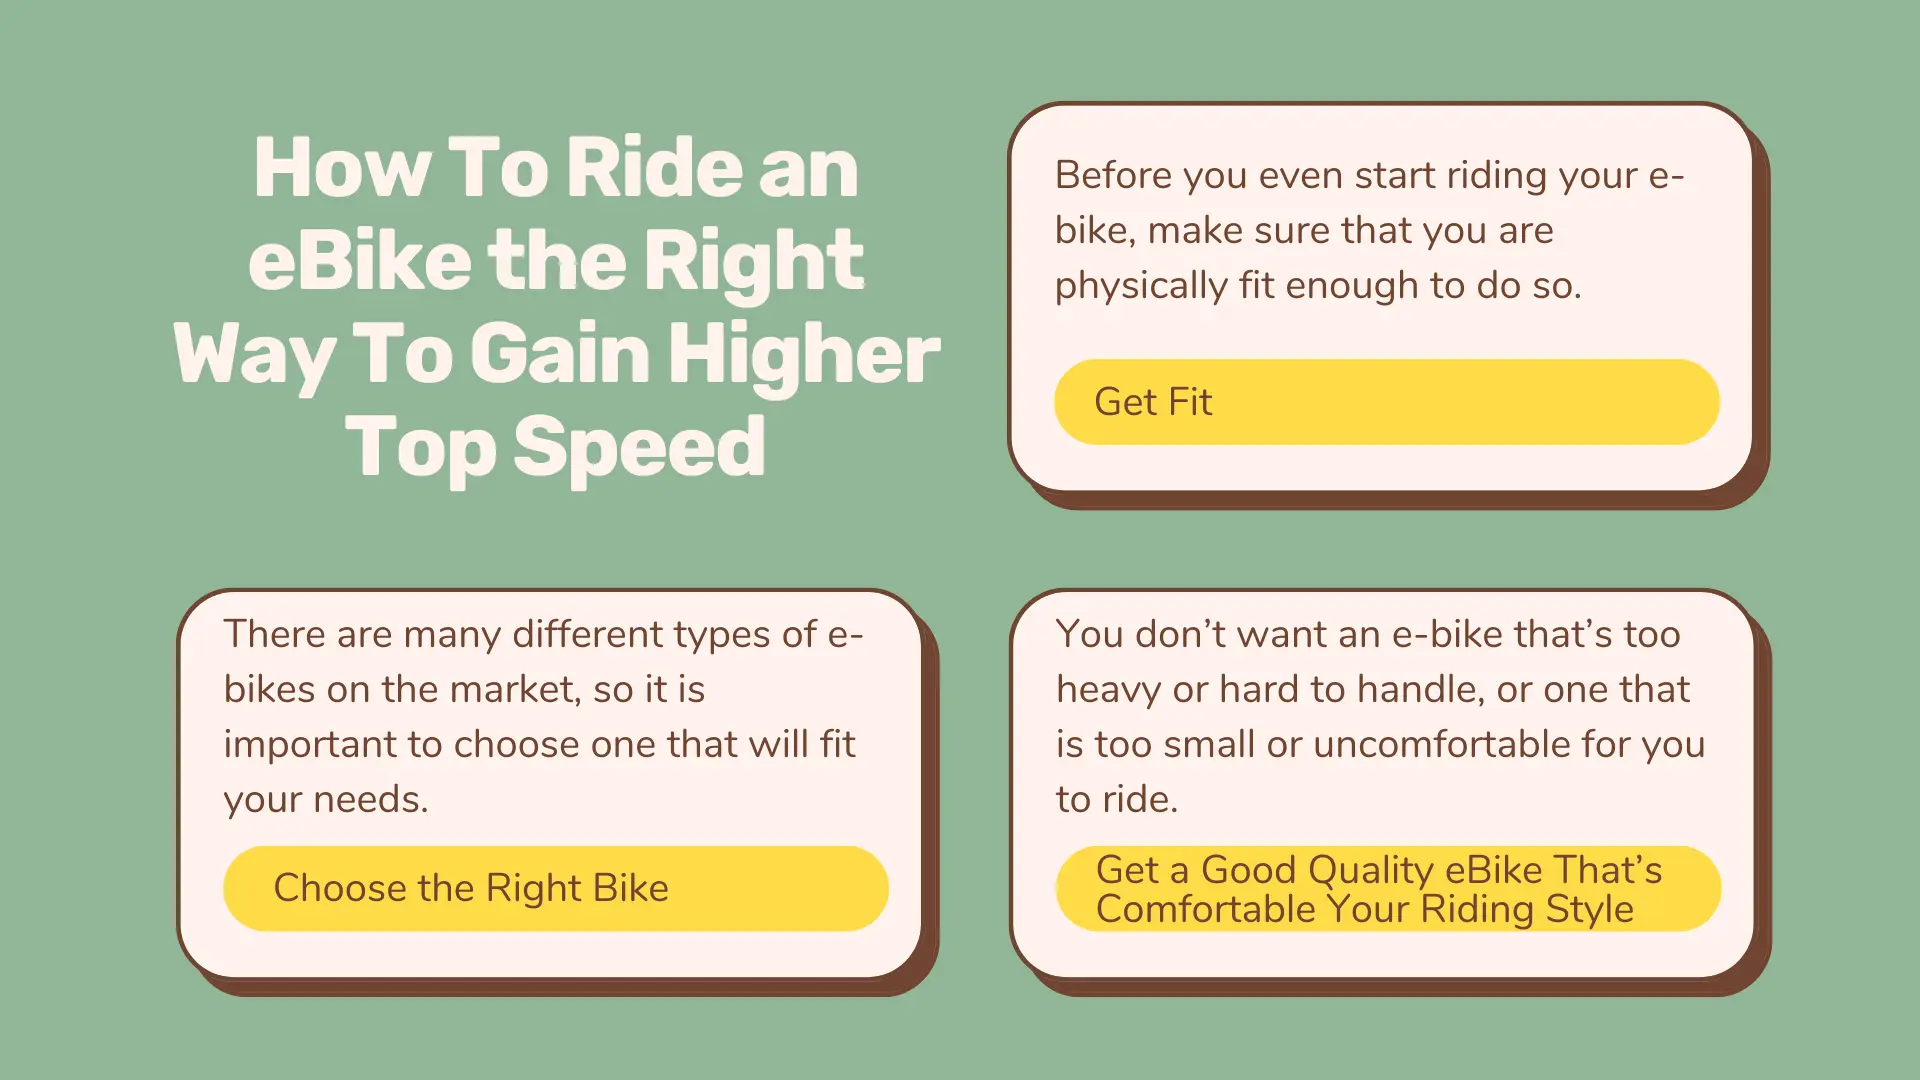 How To Ride an eBike the Right Way To Gain Higher Top Speed